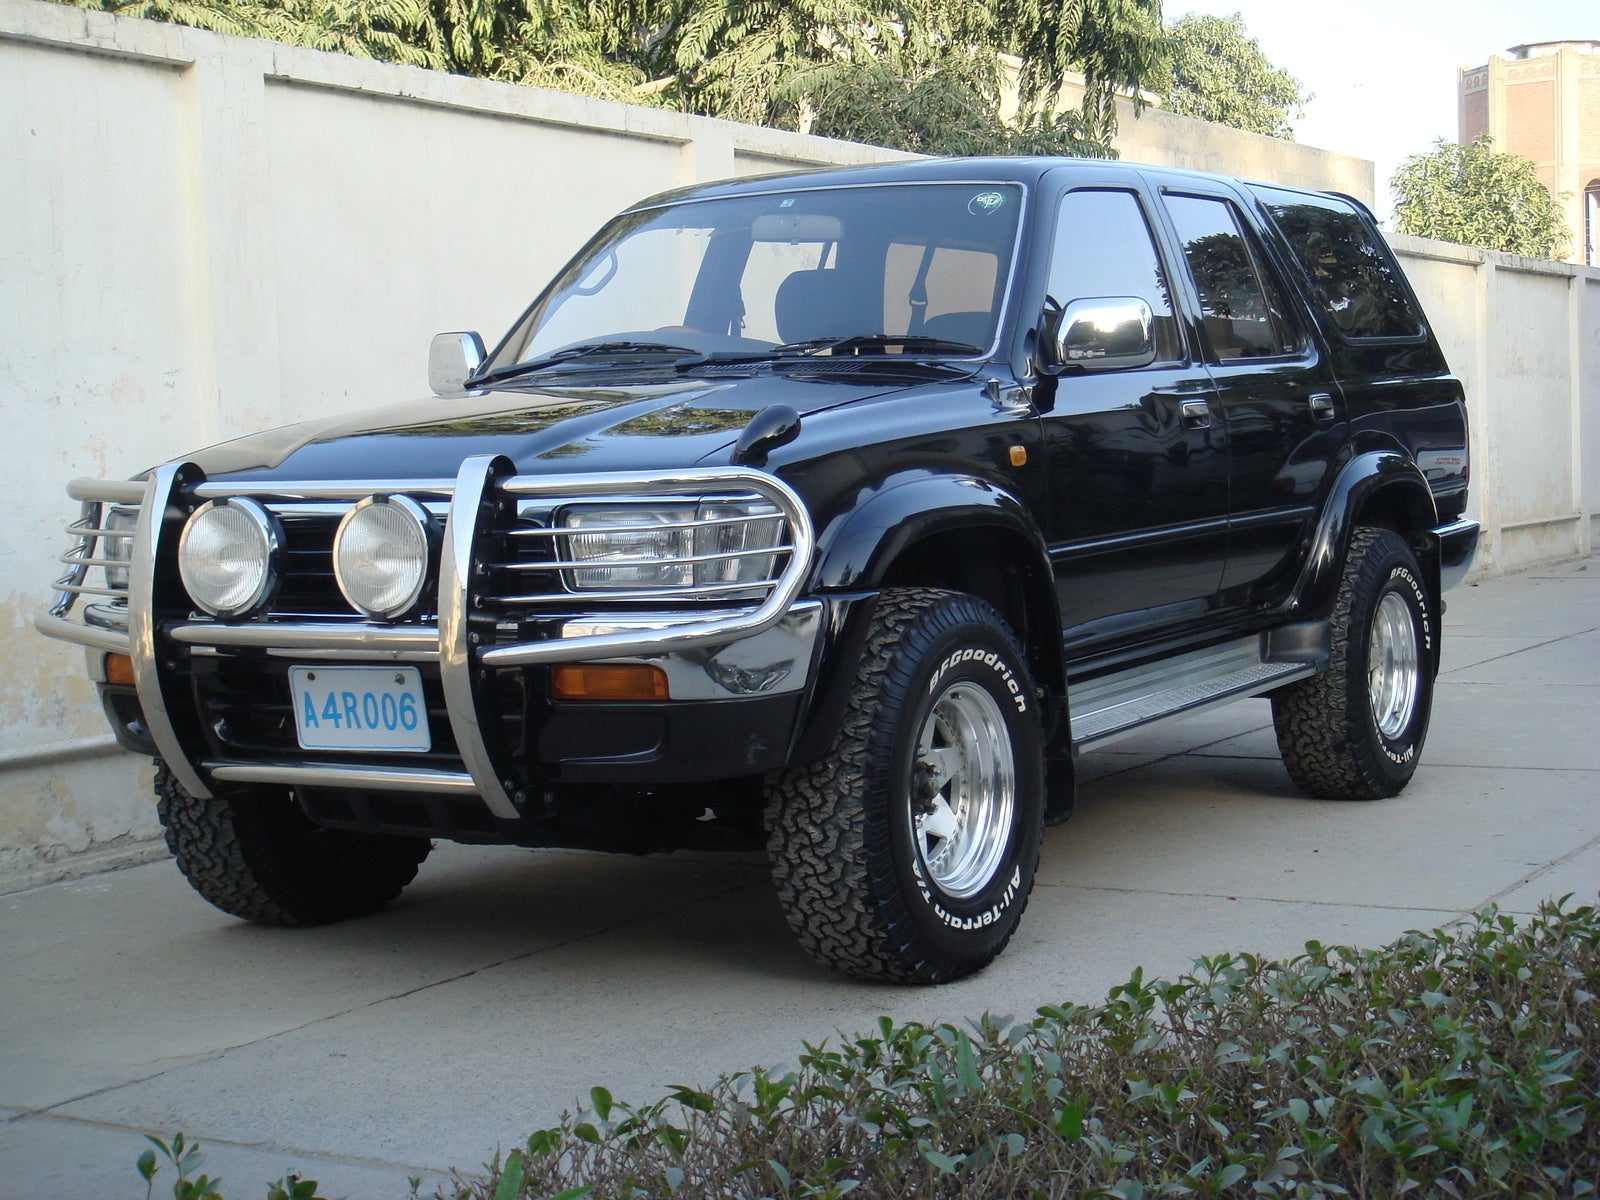 1995 Toyota 4runner owners manual